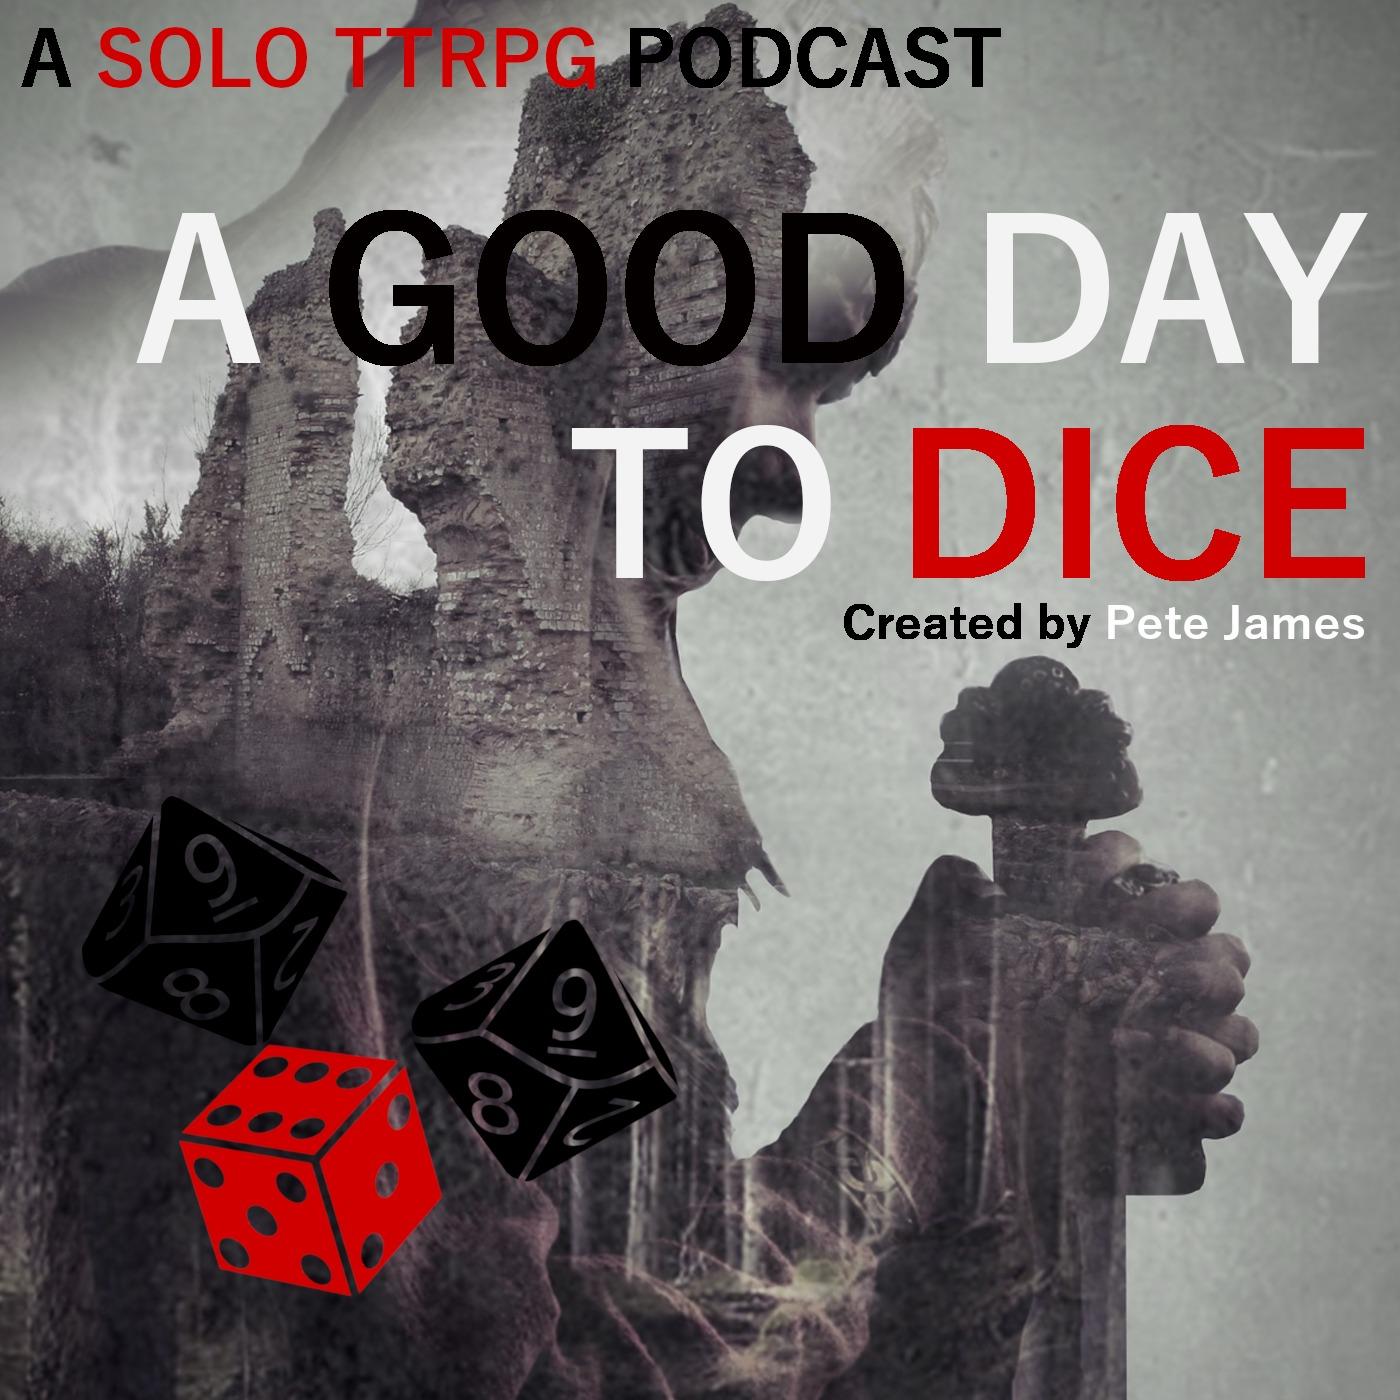 A Good Day to Dice